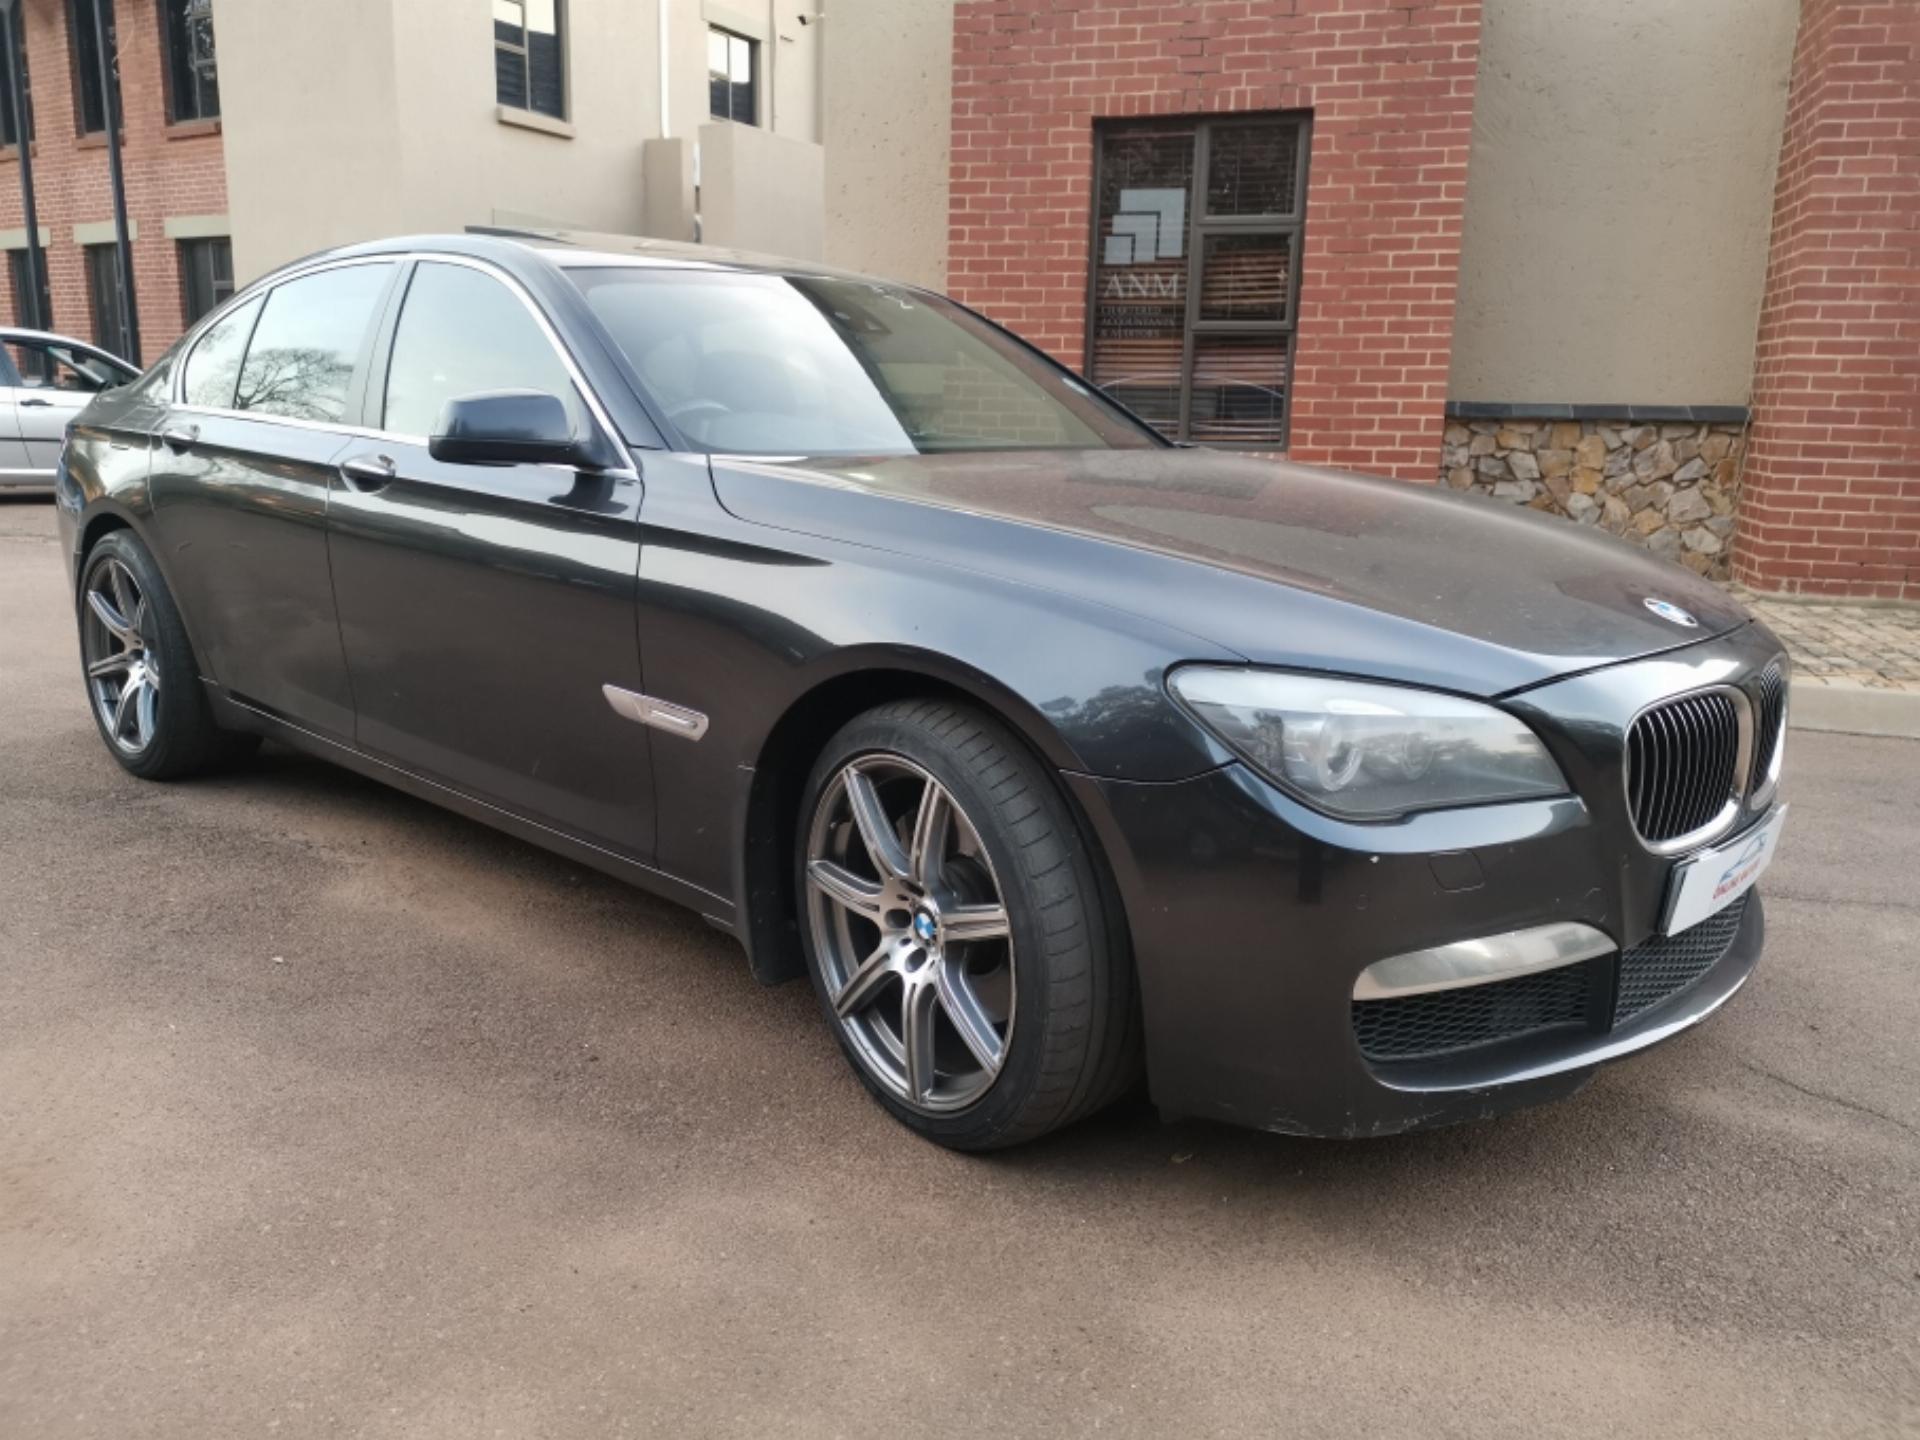 Used BMW 7 Series 730D Msports F01 Auto 2011 on auction